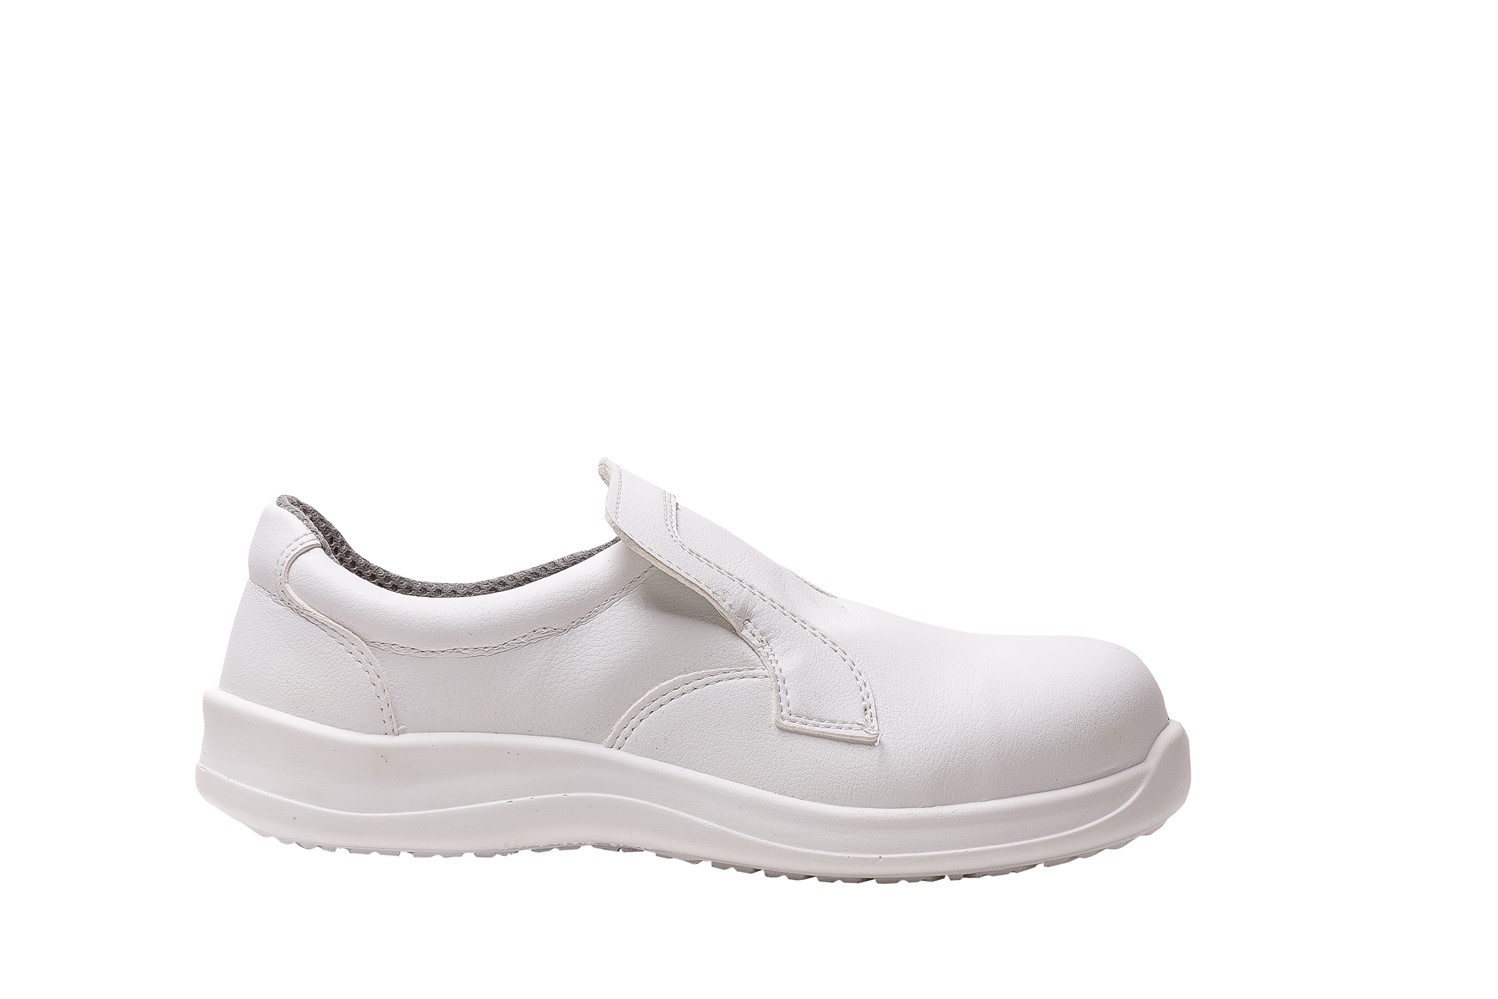 Mocassin Loafer blanc agro-alimentaire s2 src p38